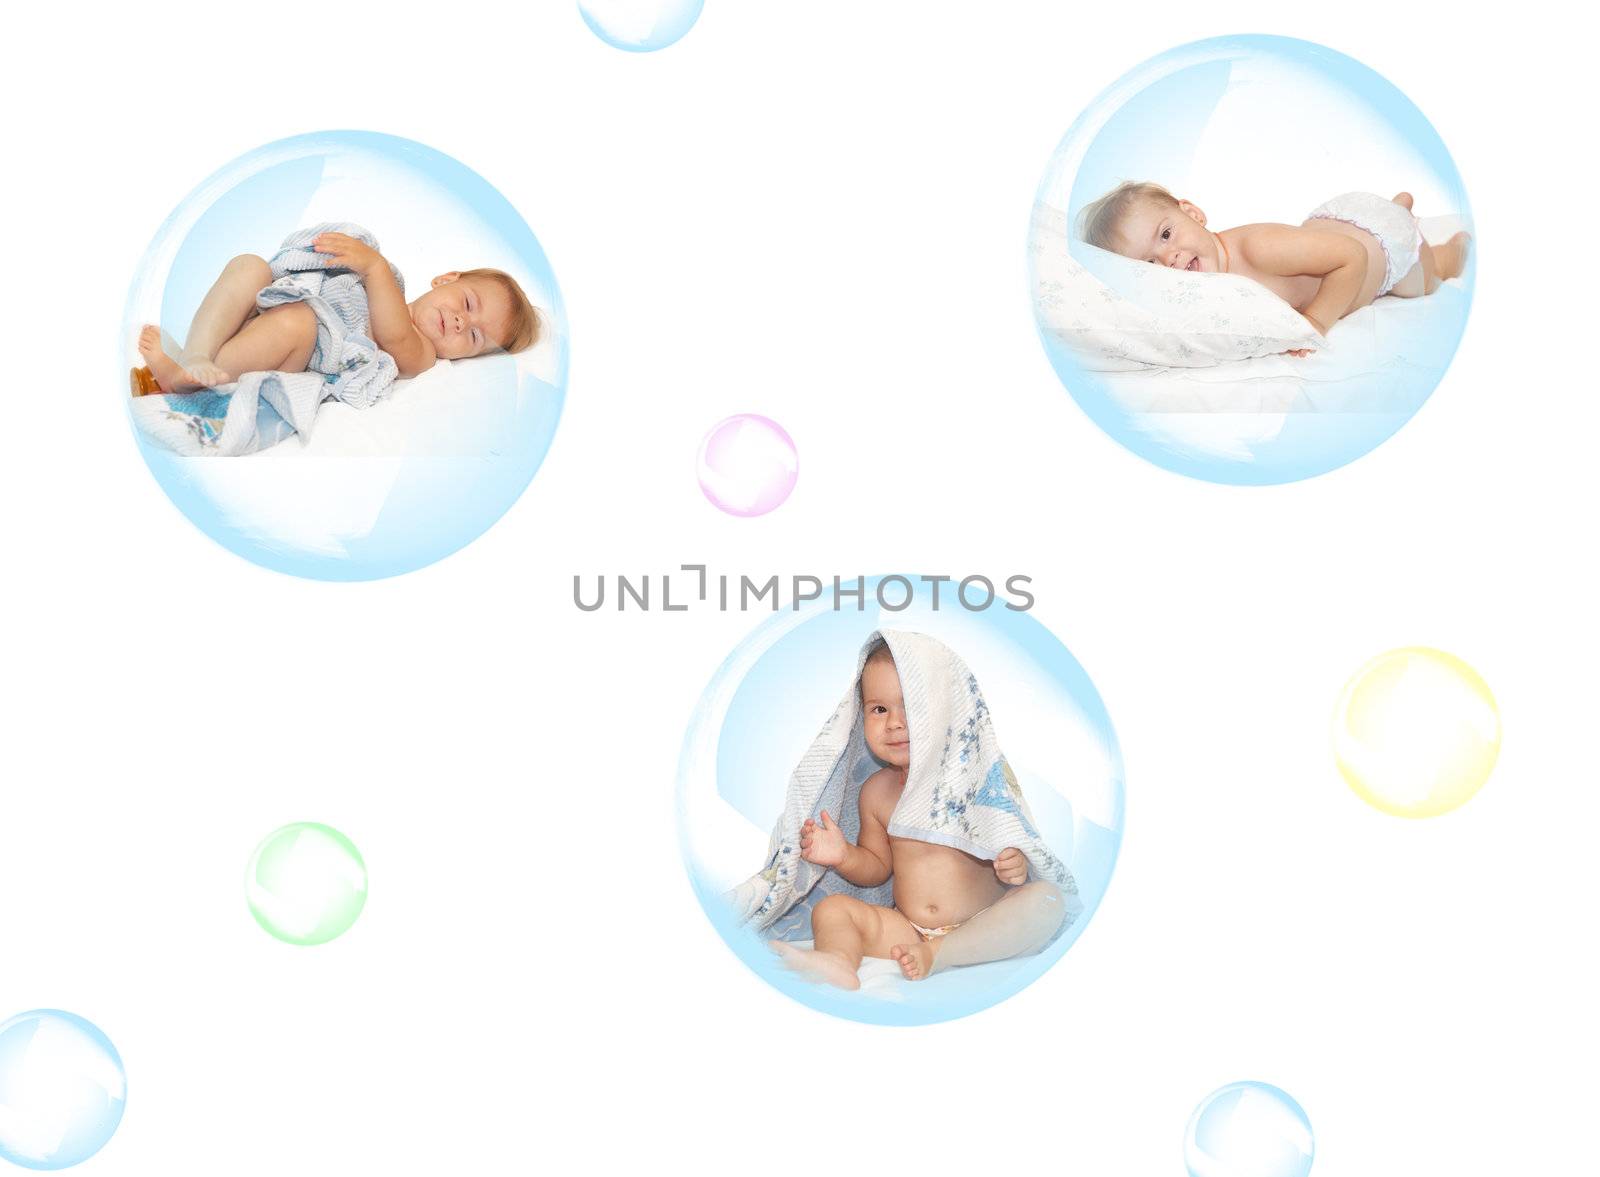 Soap bubble and child by petrkurgan